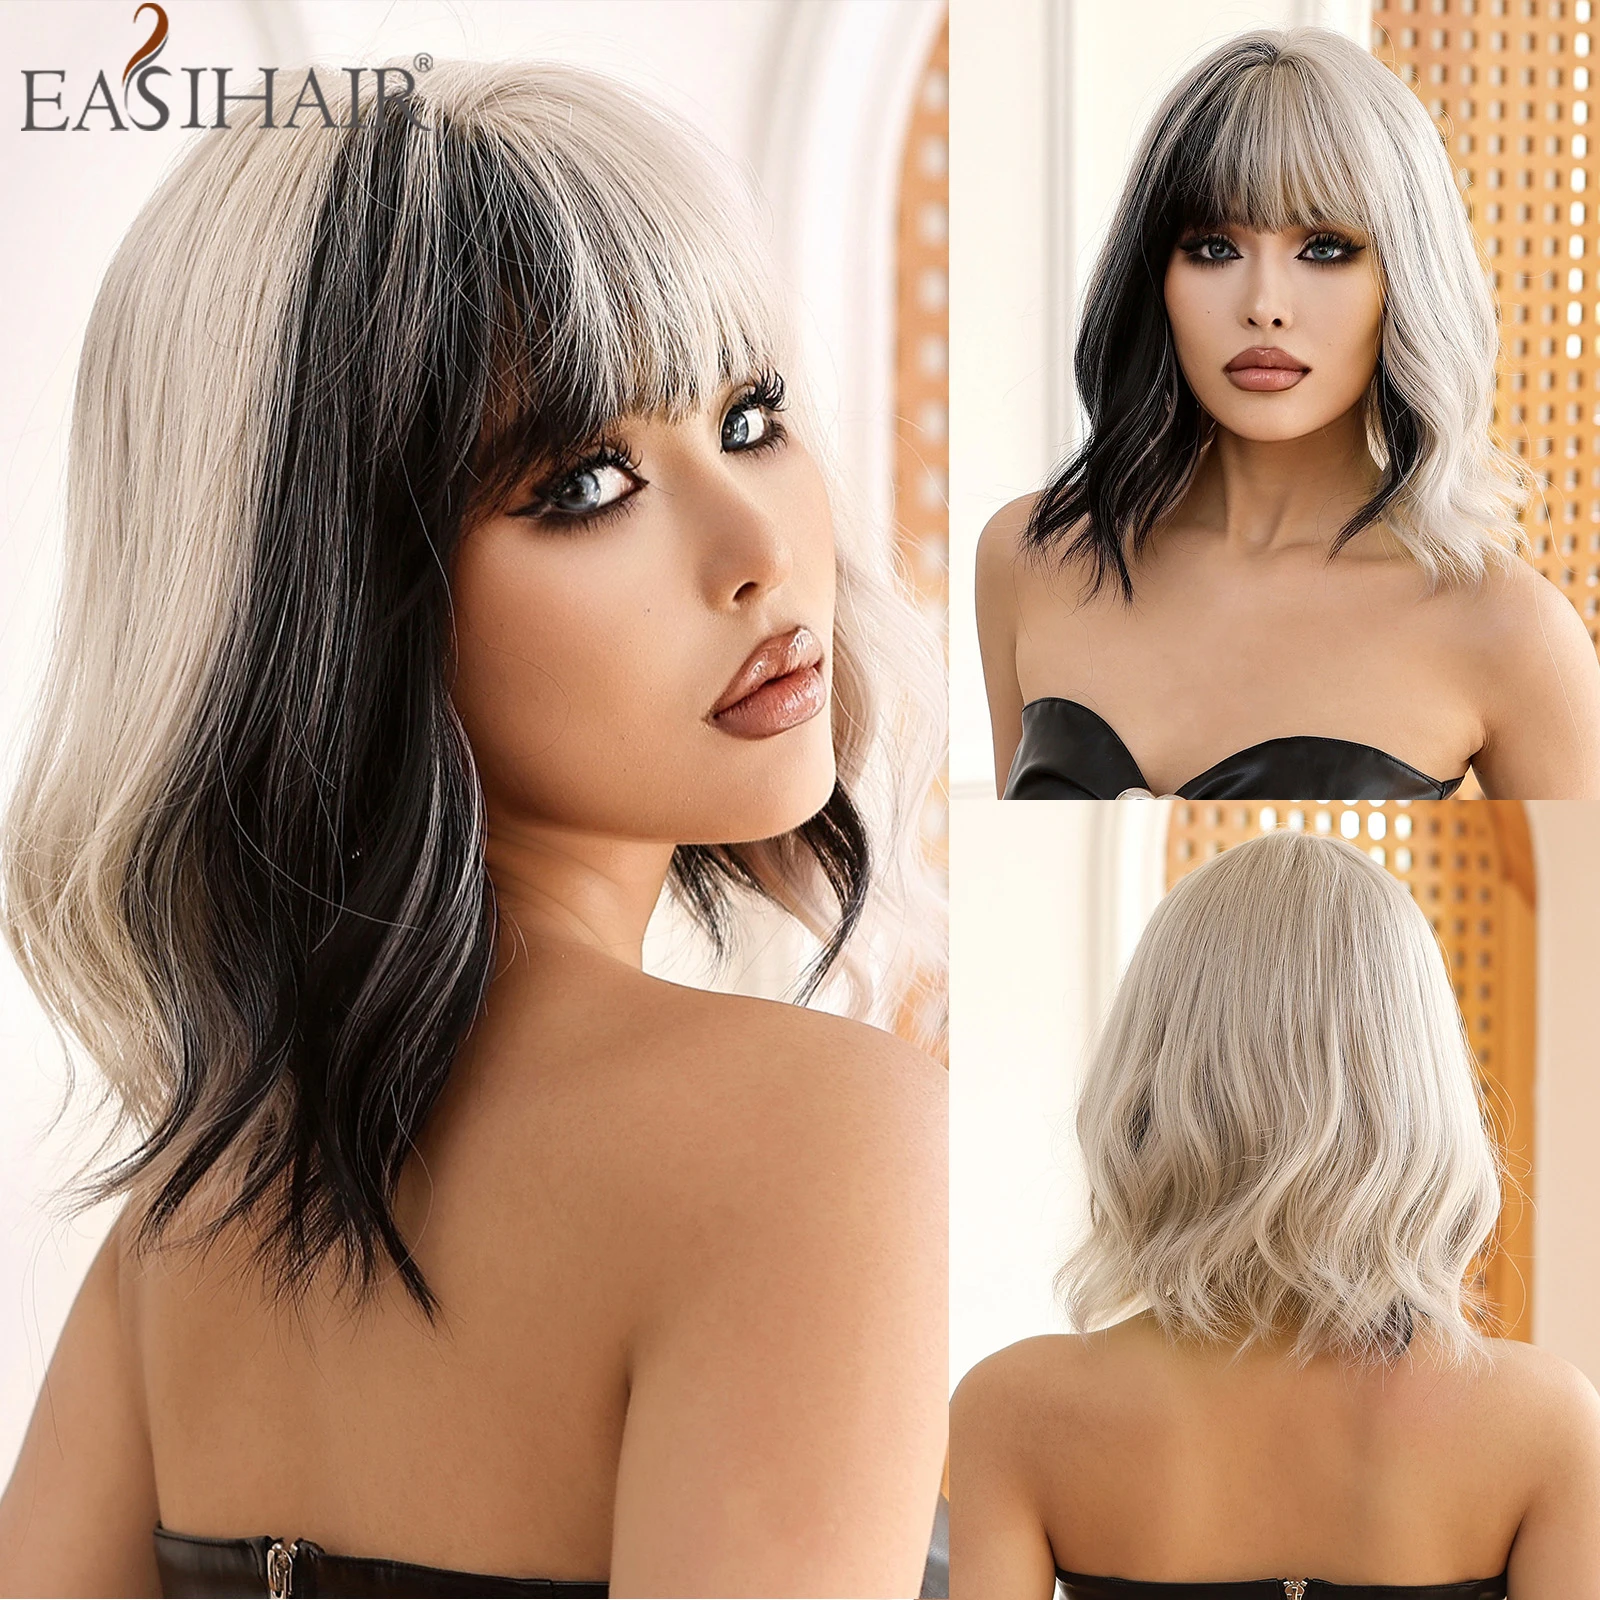 

EASIHAIR Short Wavy Synthetic Wigs for Women Platinum and Black Two Tone Bangs Wig Party Cosplay Natural Hair Wig Heat Resistant